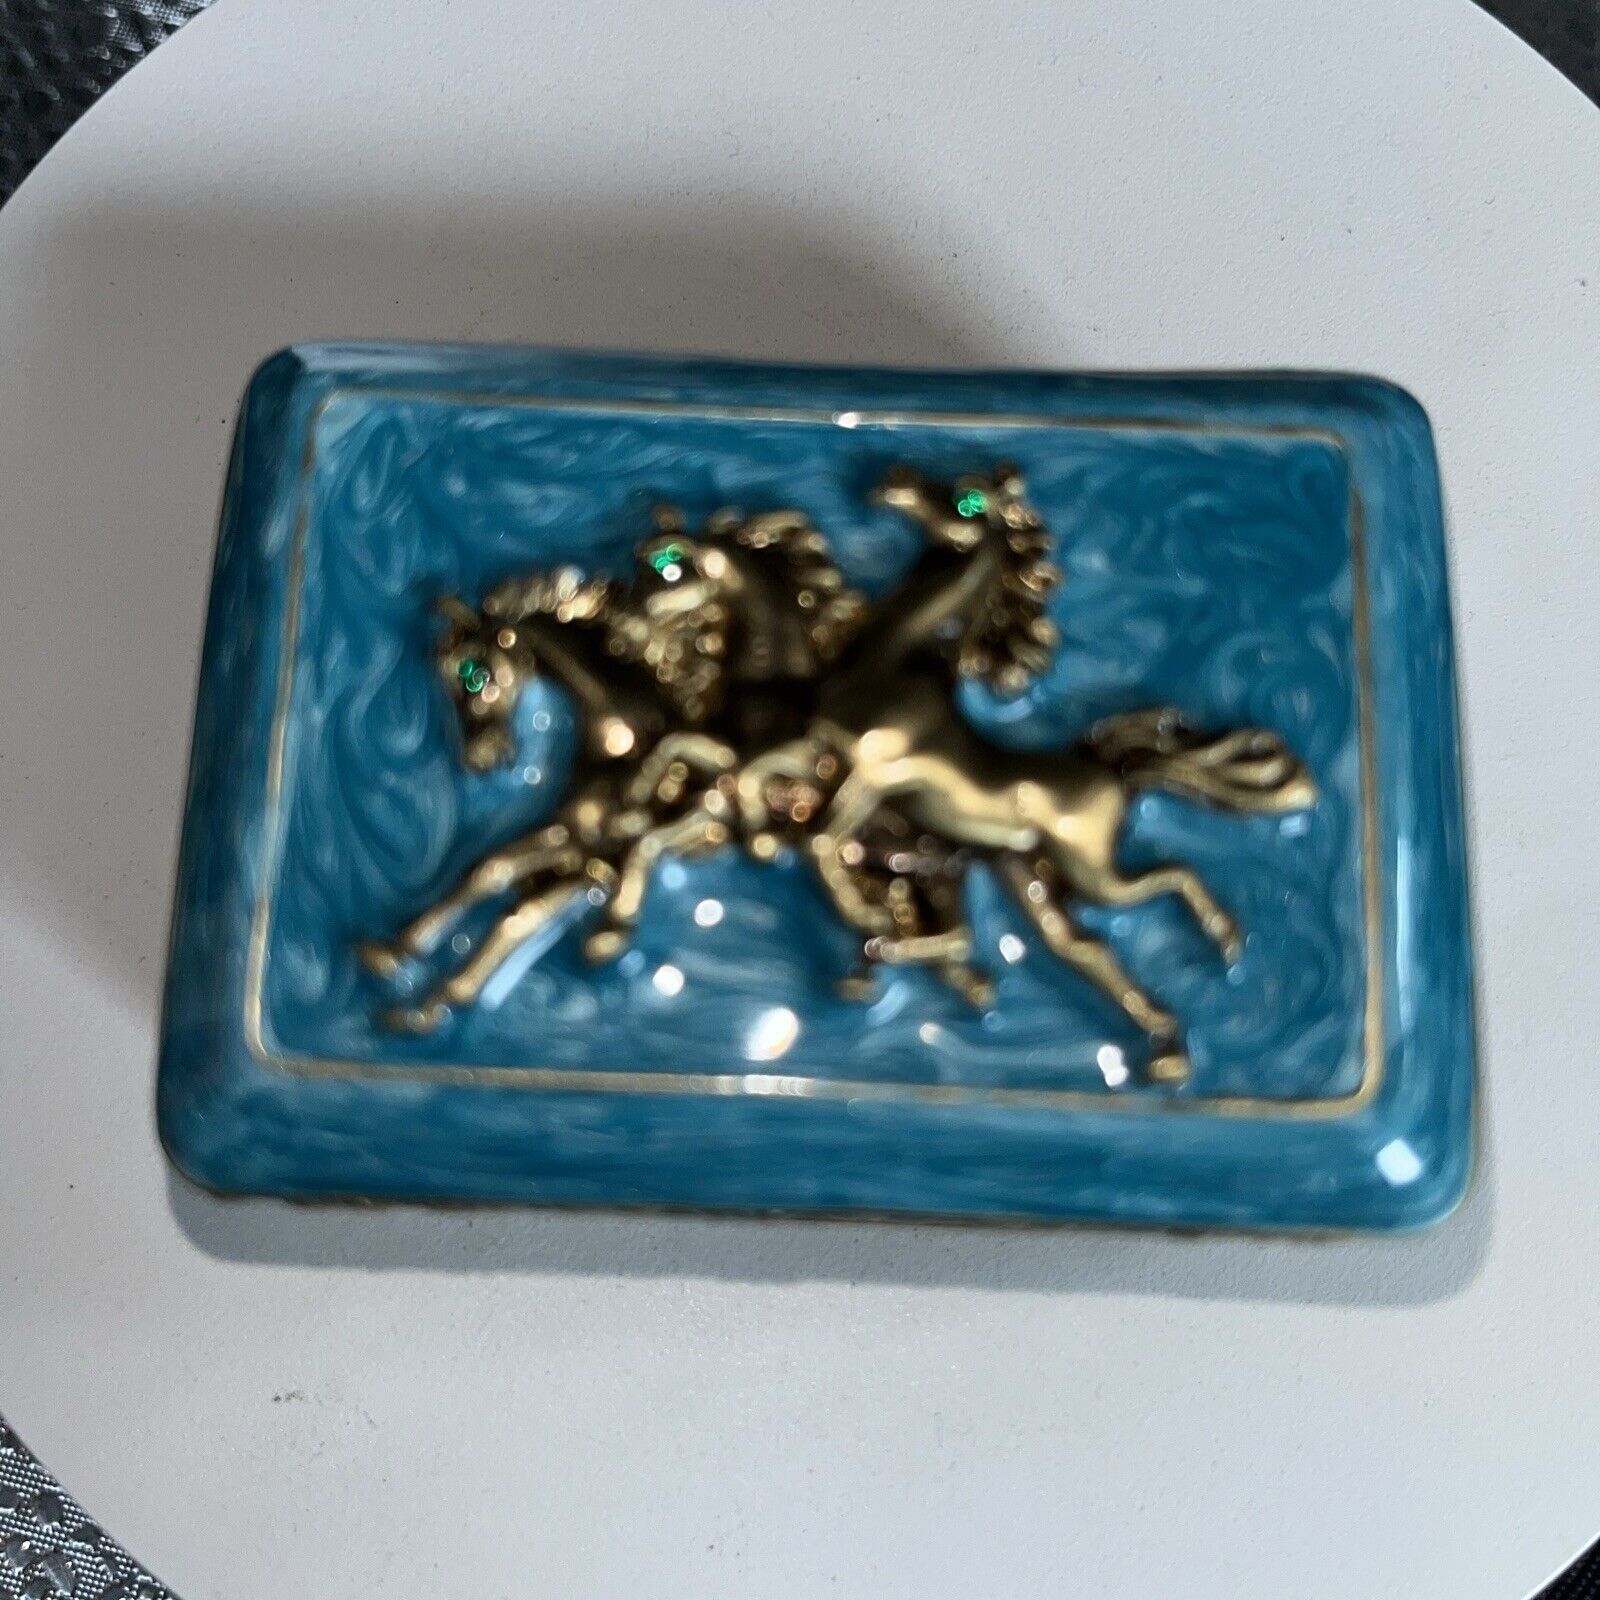 TURQUOIS HORSE DECORATED TRINKET BOX BY KEREN KOPAL, HARD TO FIND, NICE GIFT